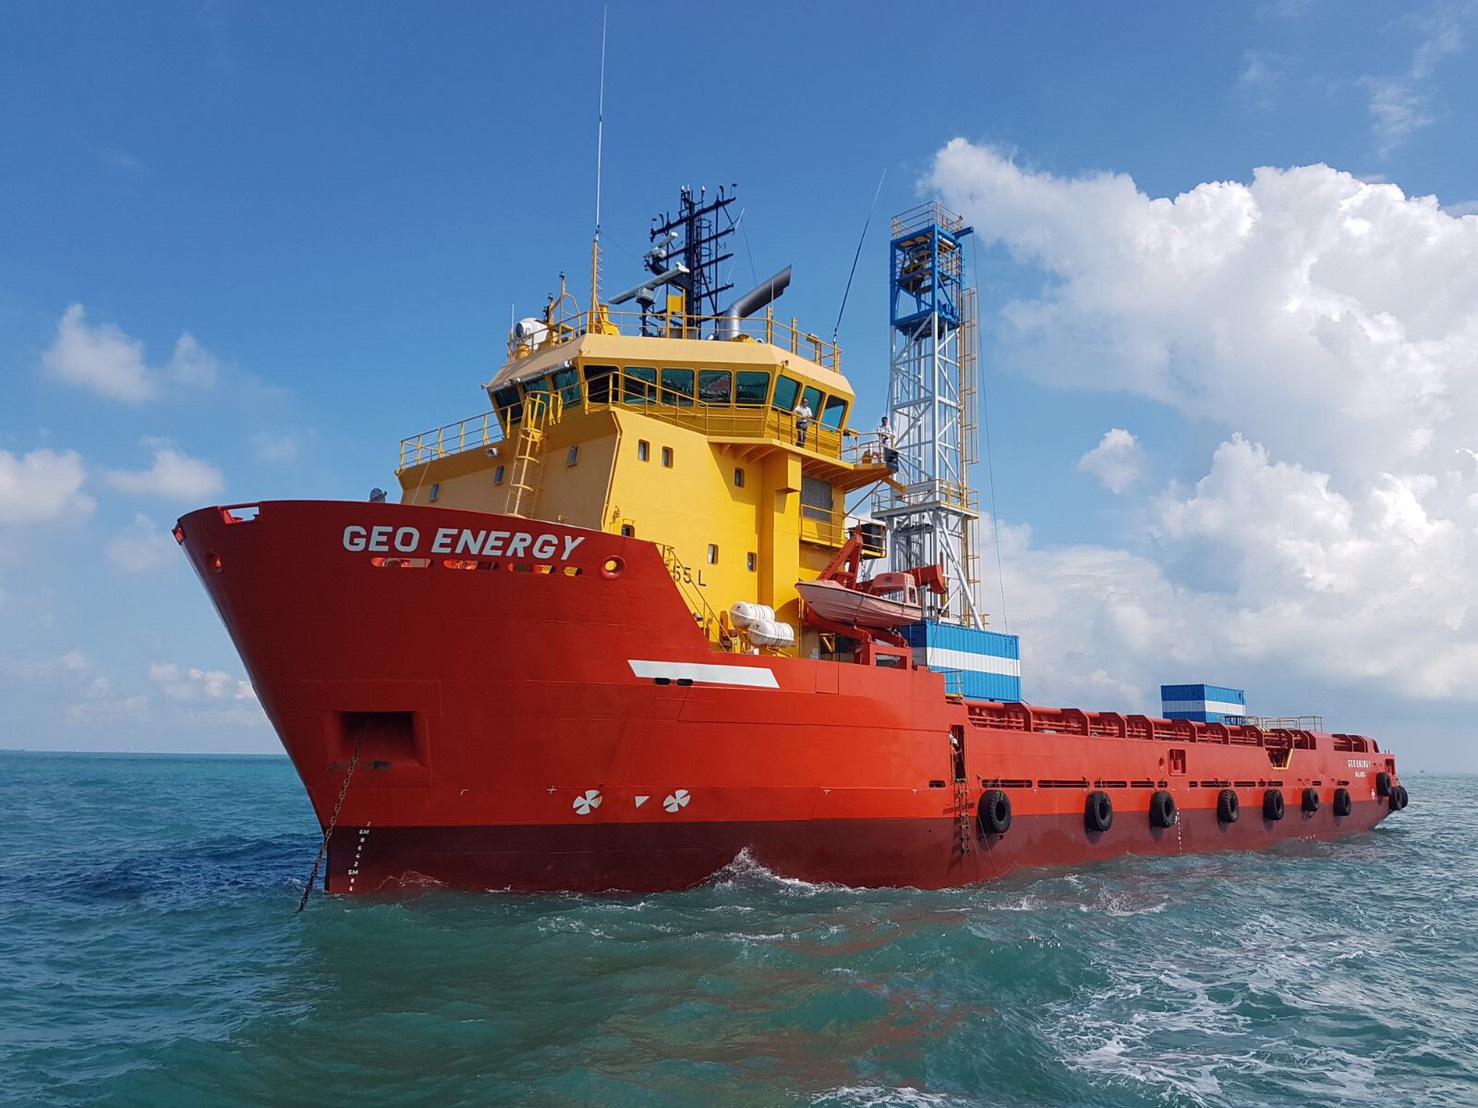 Taiwanese geotechnical vessel under conversion to prep for local offshore wind market